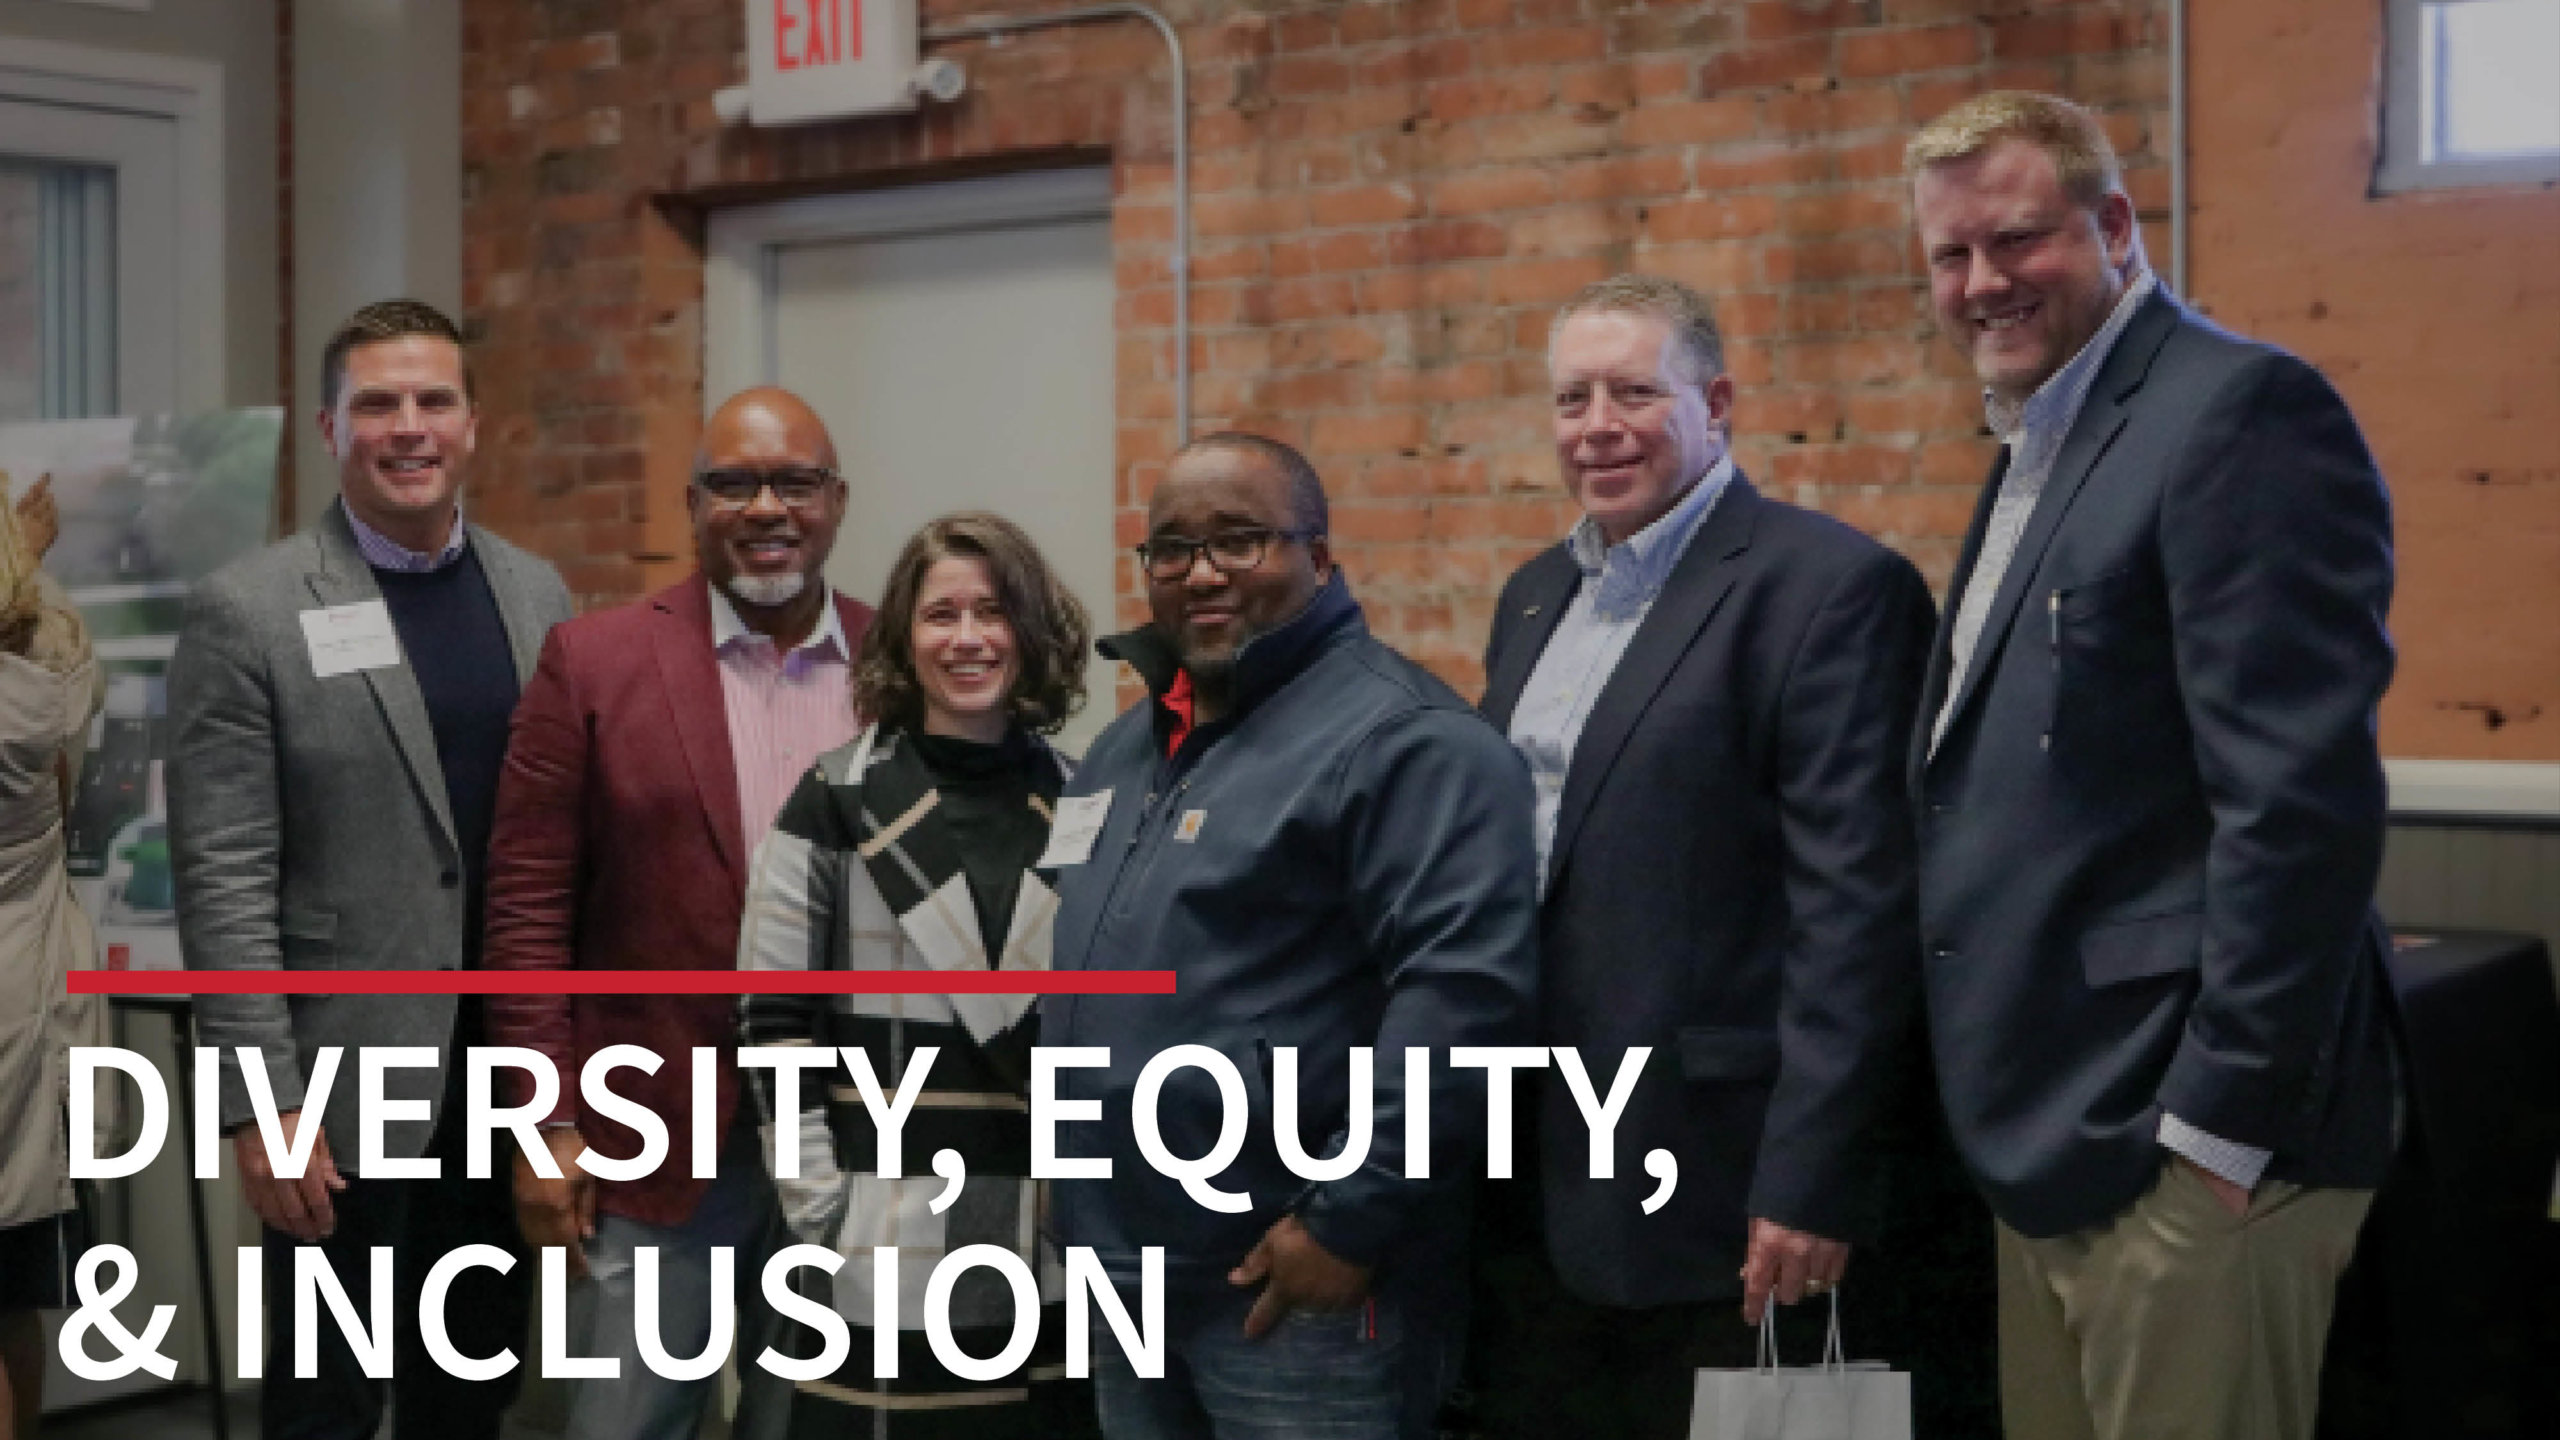 We're building a foundation of inclusivity, respect, and opportunity